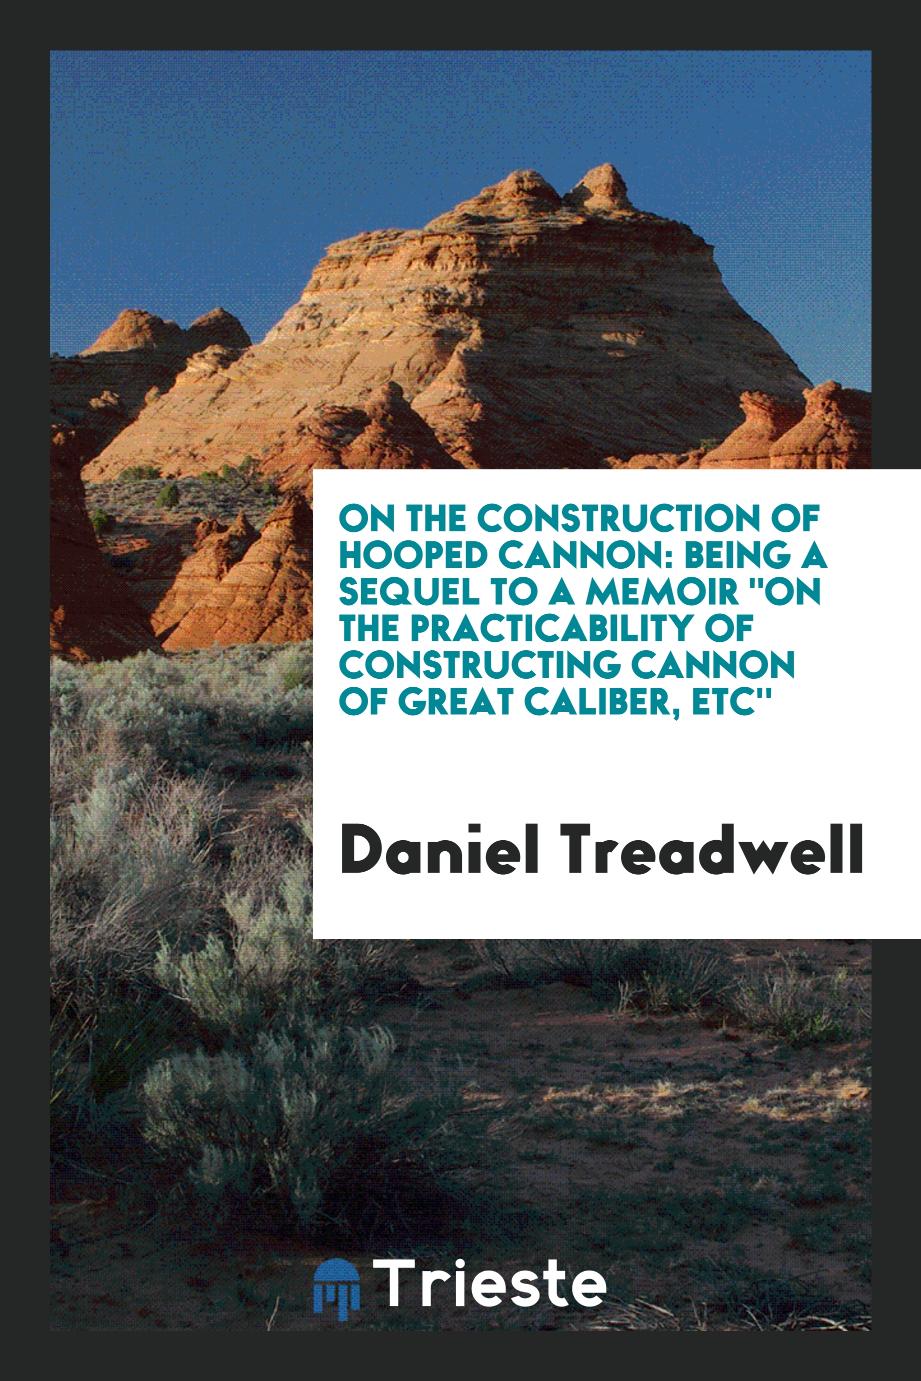 On the Construction of Hooped Cannon: Being a Sequel to a Memoir "On the Practicability of constructing cannon of great caliber, etc''